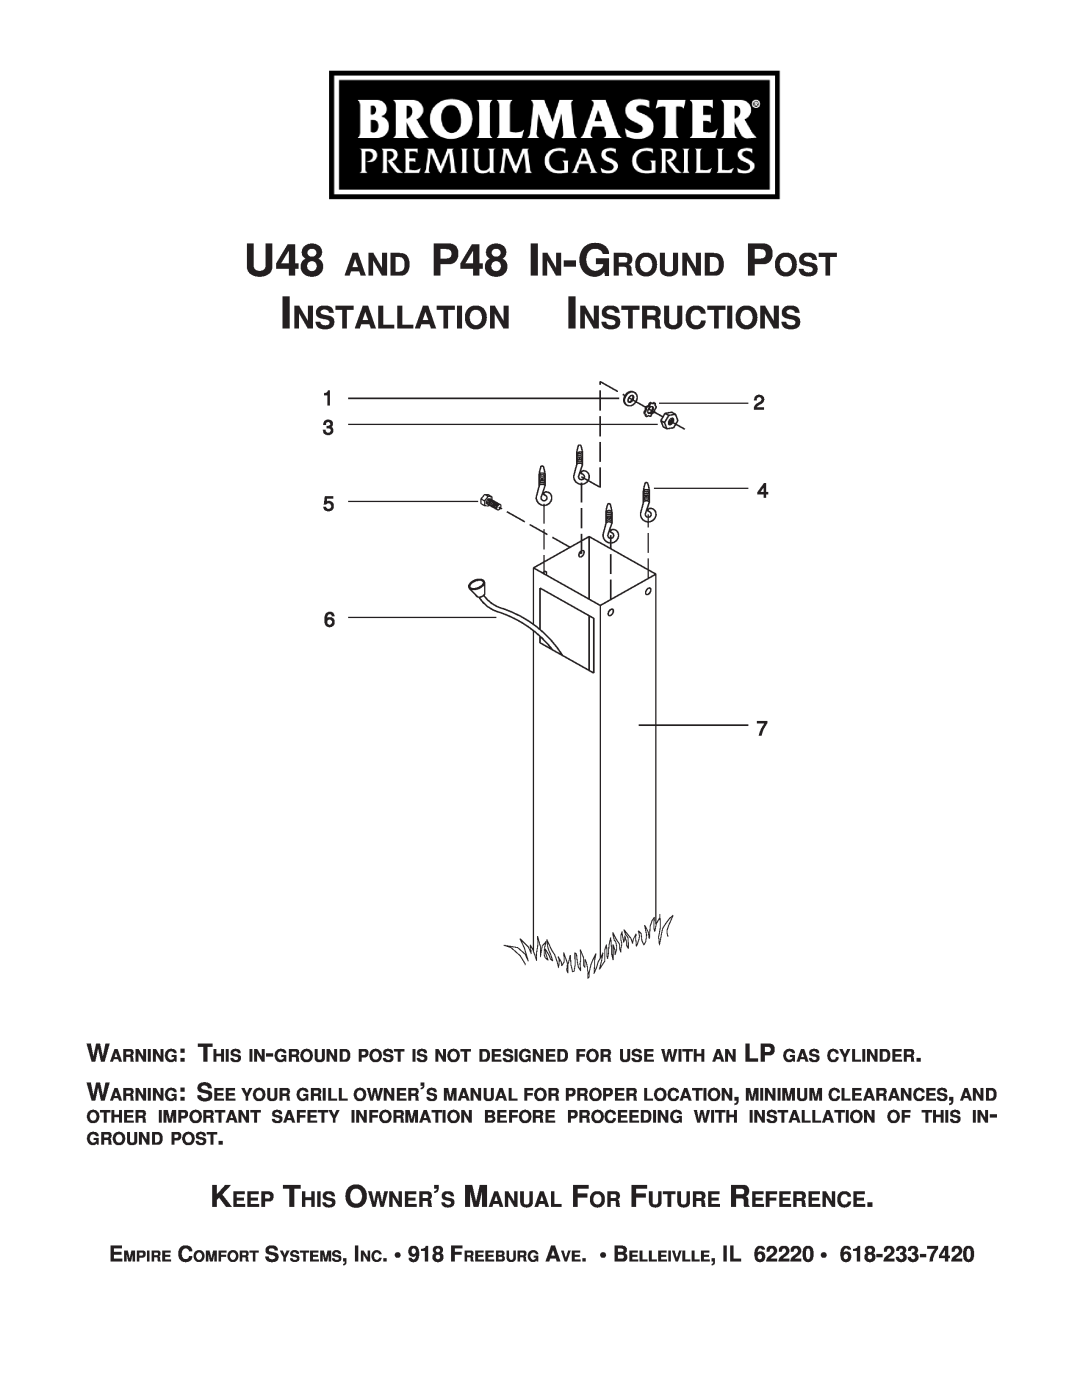 Broilmaster U26, DC, PB U48 AND P48 IN-GROUND POST INSTALLATION INSTRUCTIONS, Keep This Owner’S Manual For Future Reference 